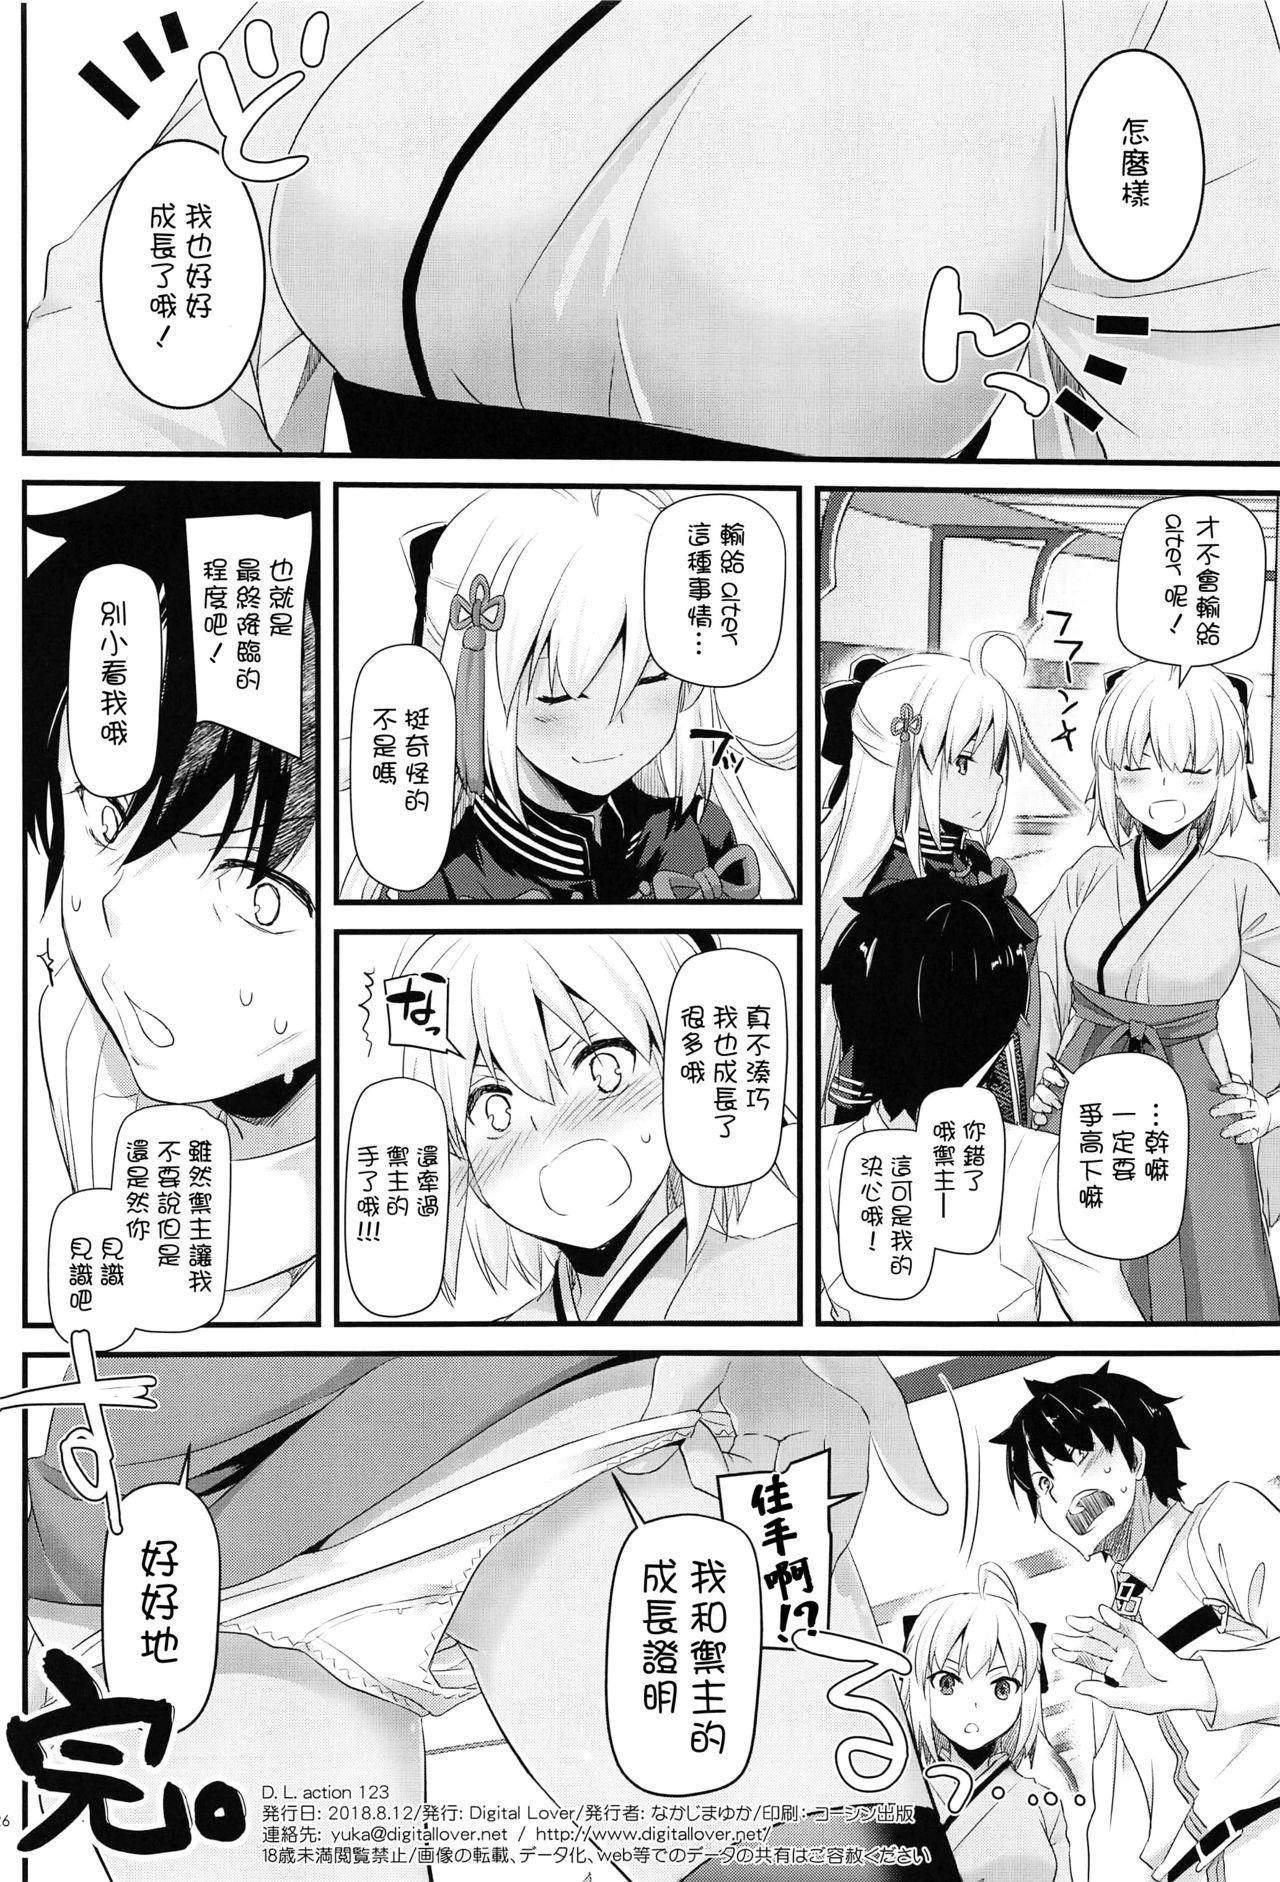 Strap On D.L. action 123 - Fate grand order Vietnamese - Page 26